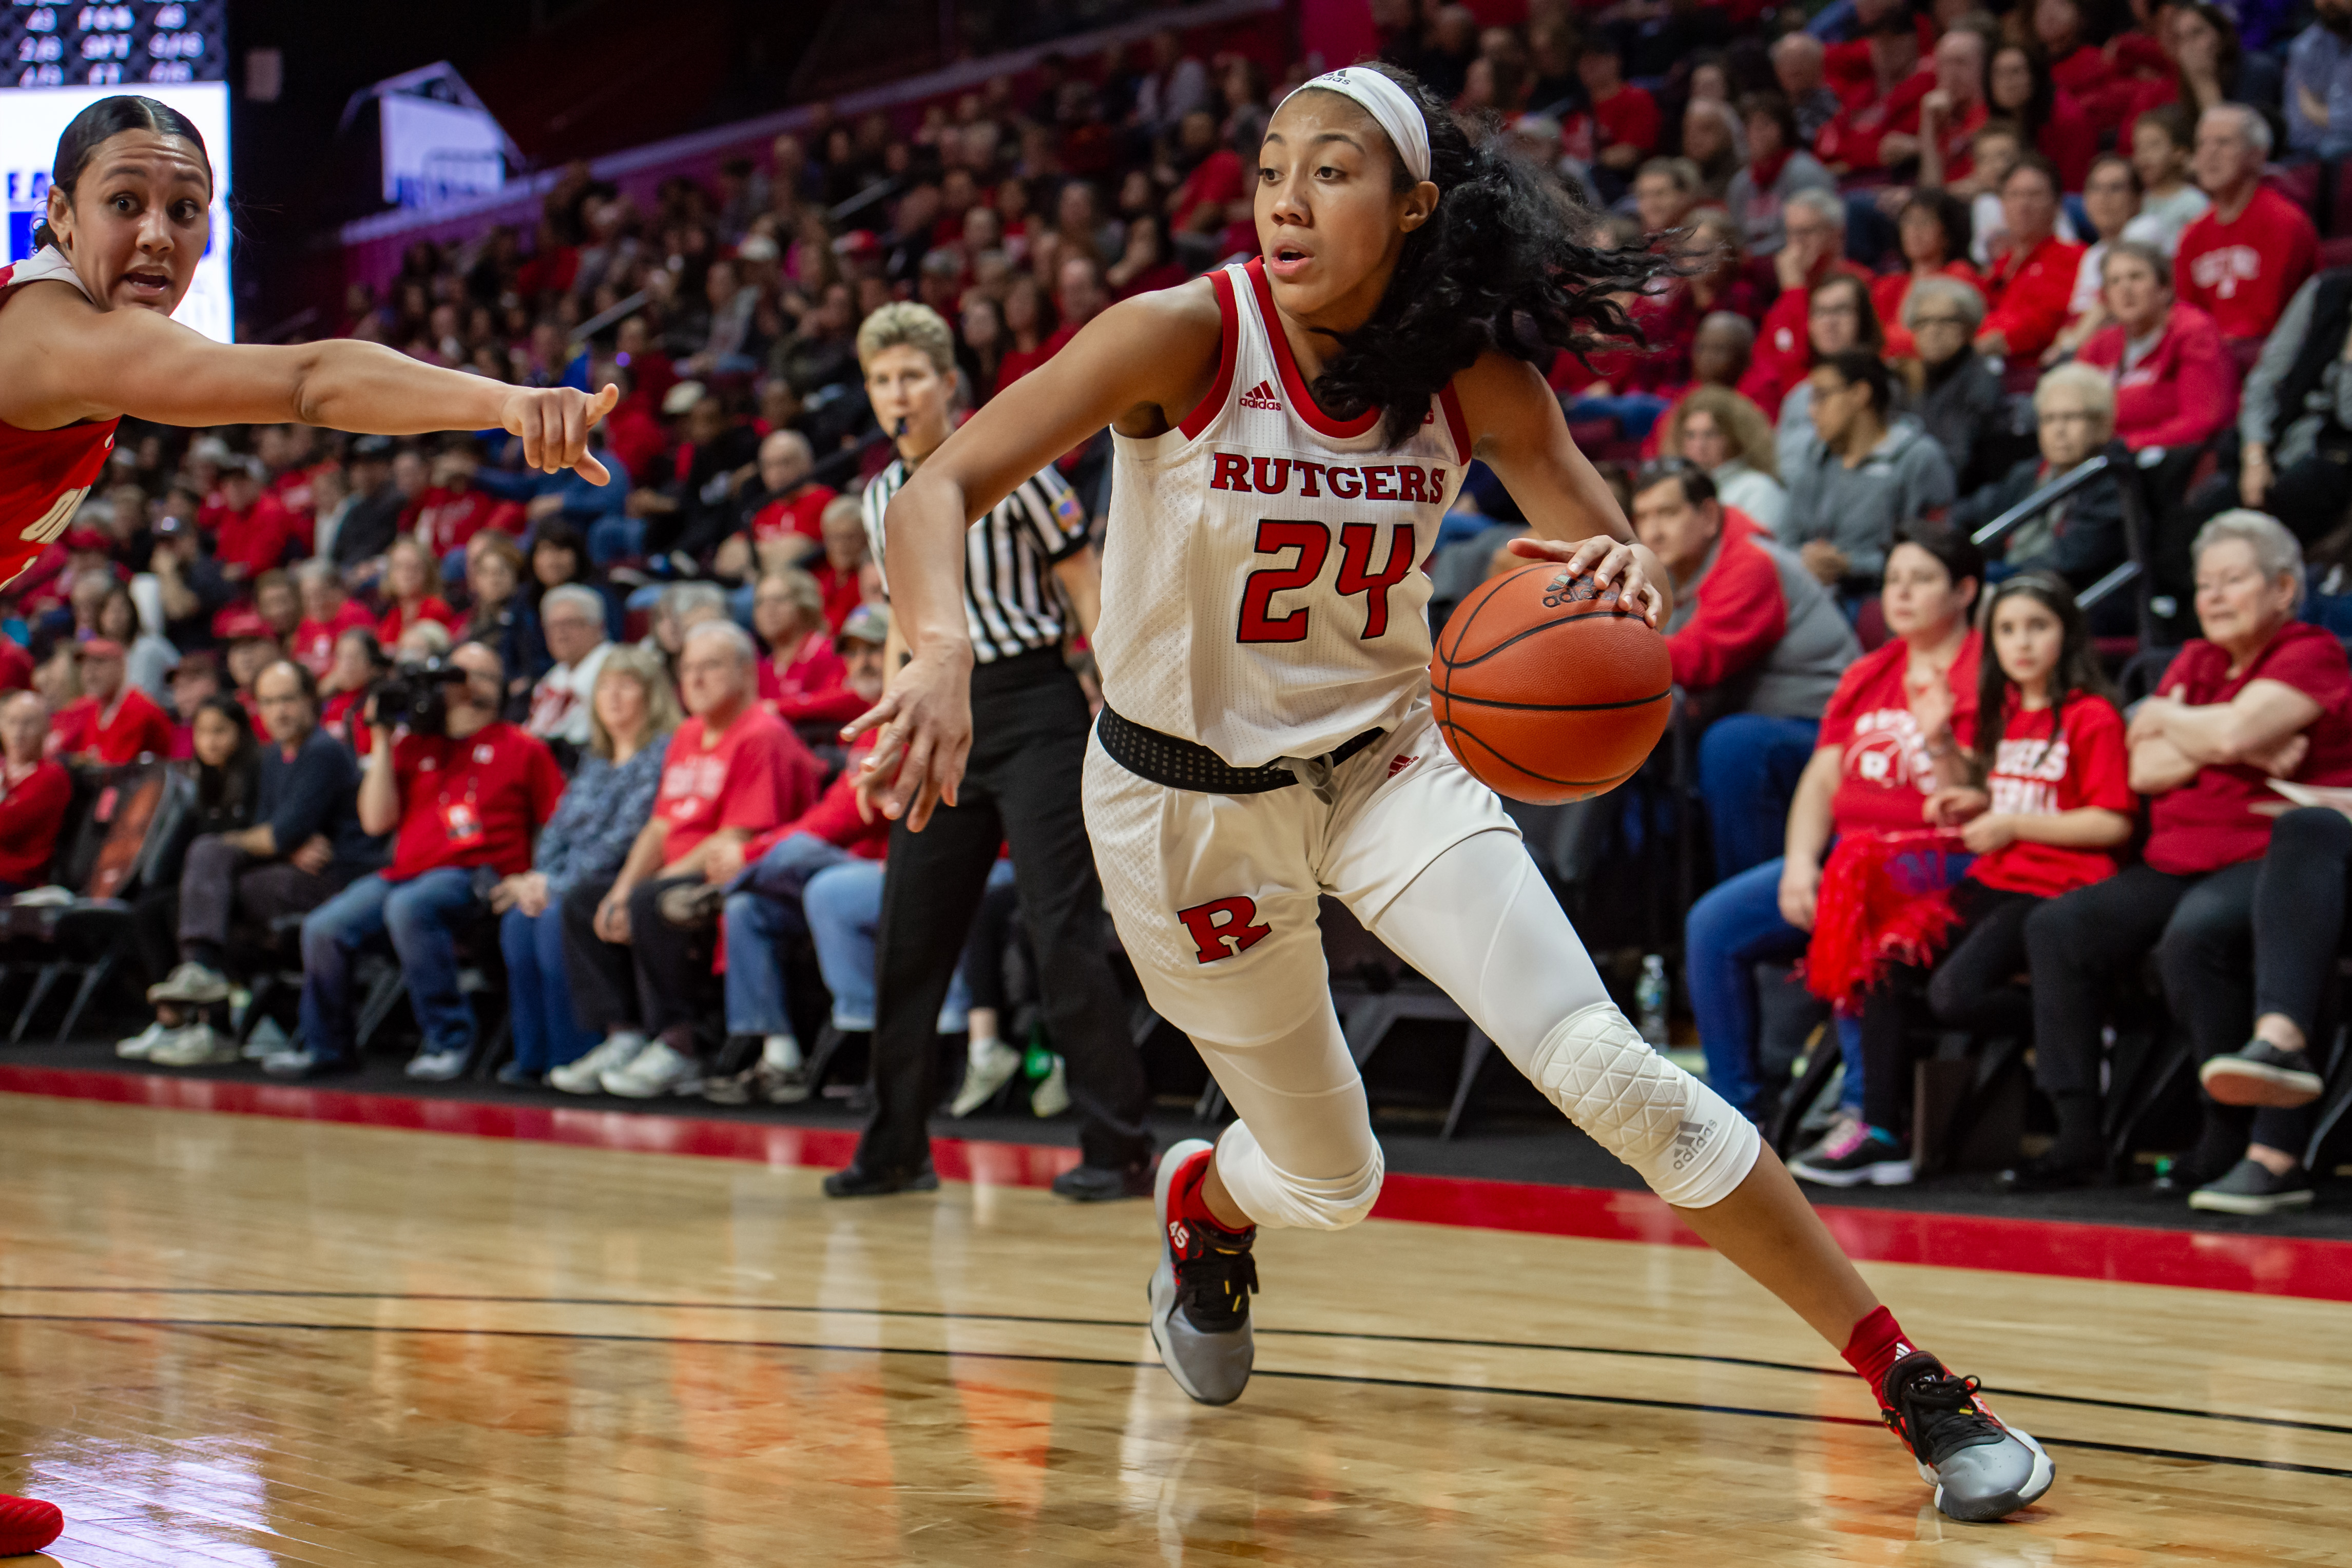 COLLEGE BASKETBALL: FEB 22 Women’s Ohio State at Rutgers